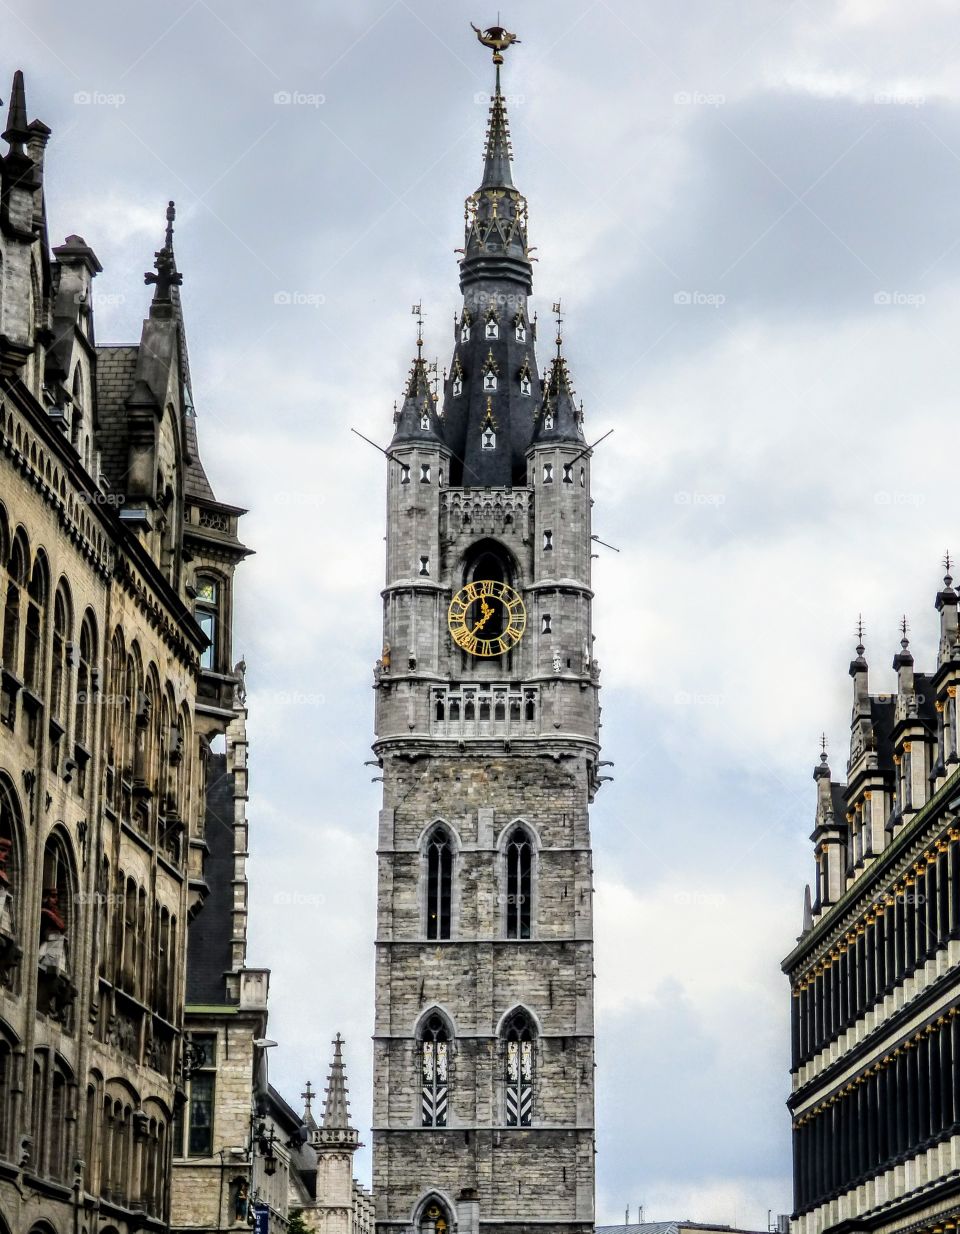 Belfry Tower at the center of Ghent - Flanders